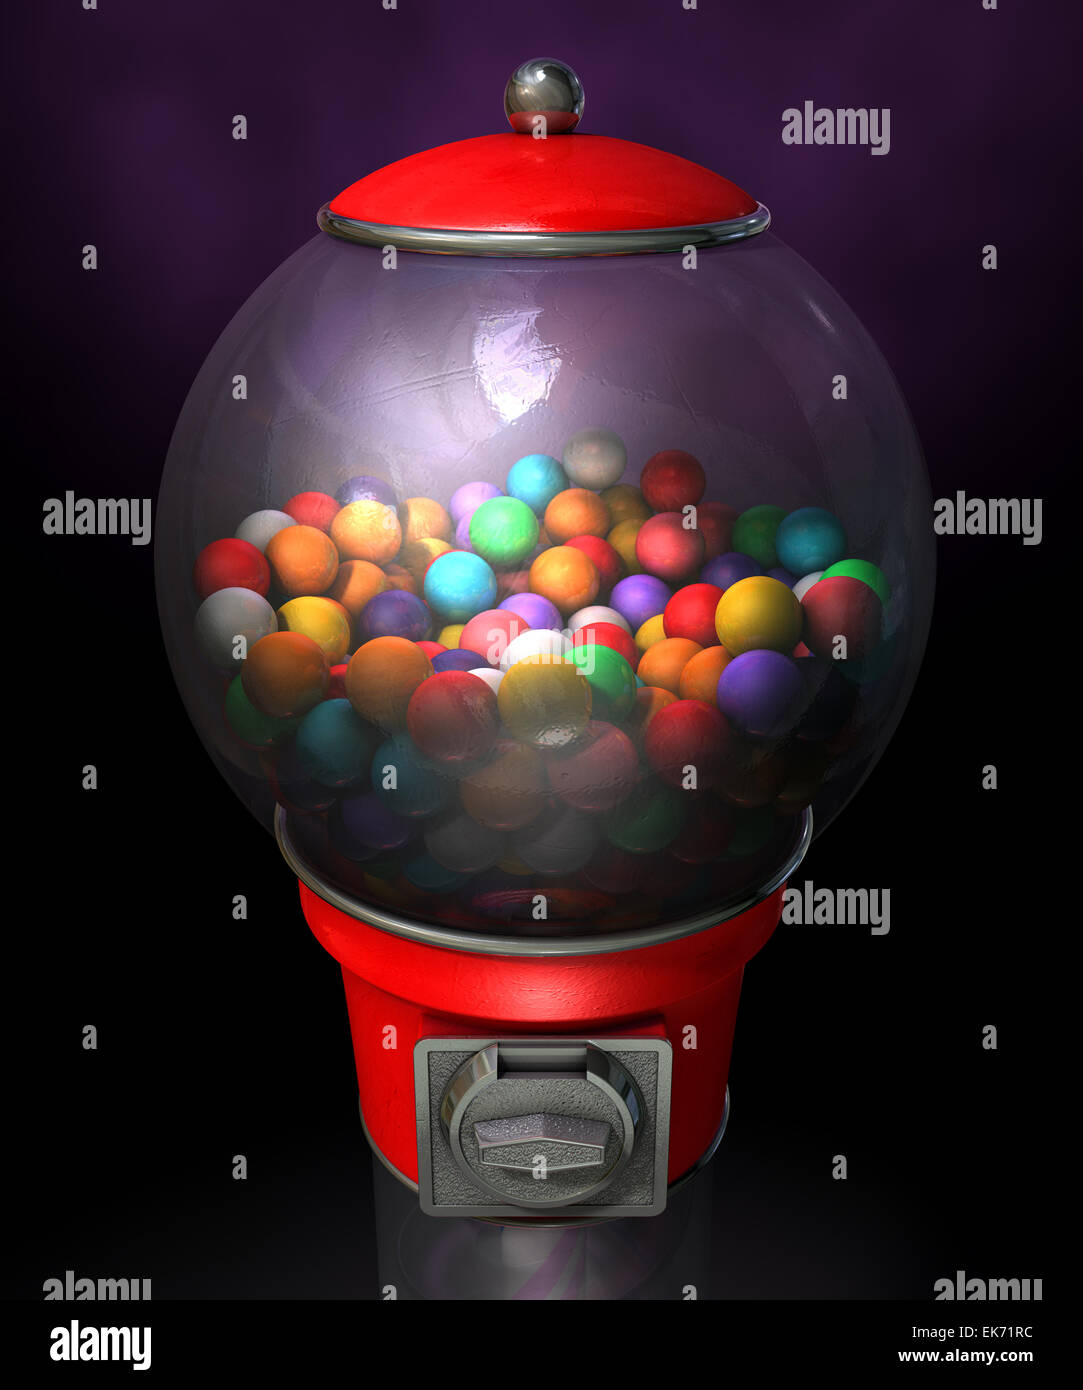 A regular red vintage gumball dispenser machine made of glass and reflective plastic with chrome trim filled with multicolored g Stock Photo